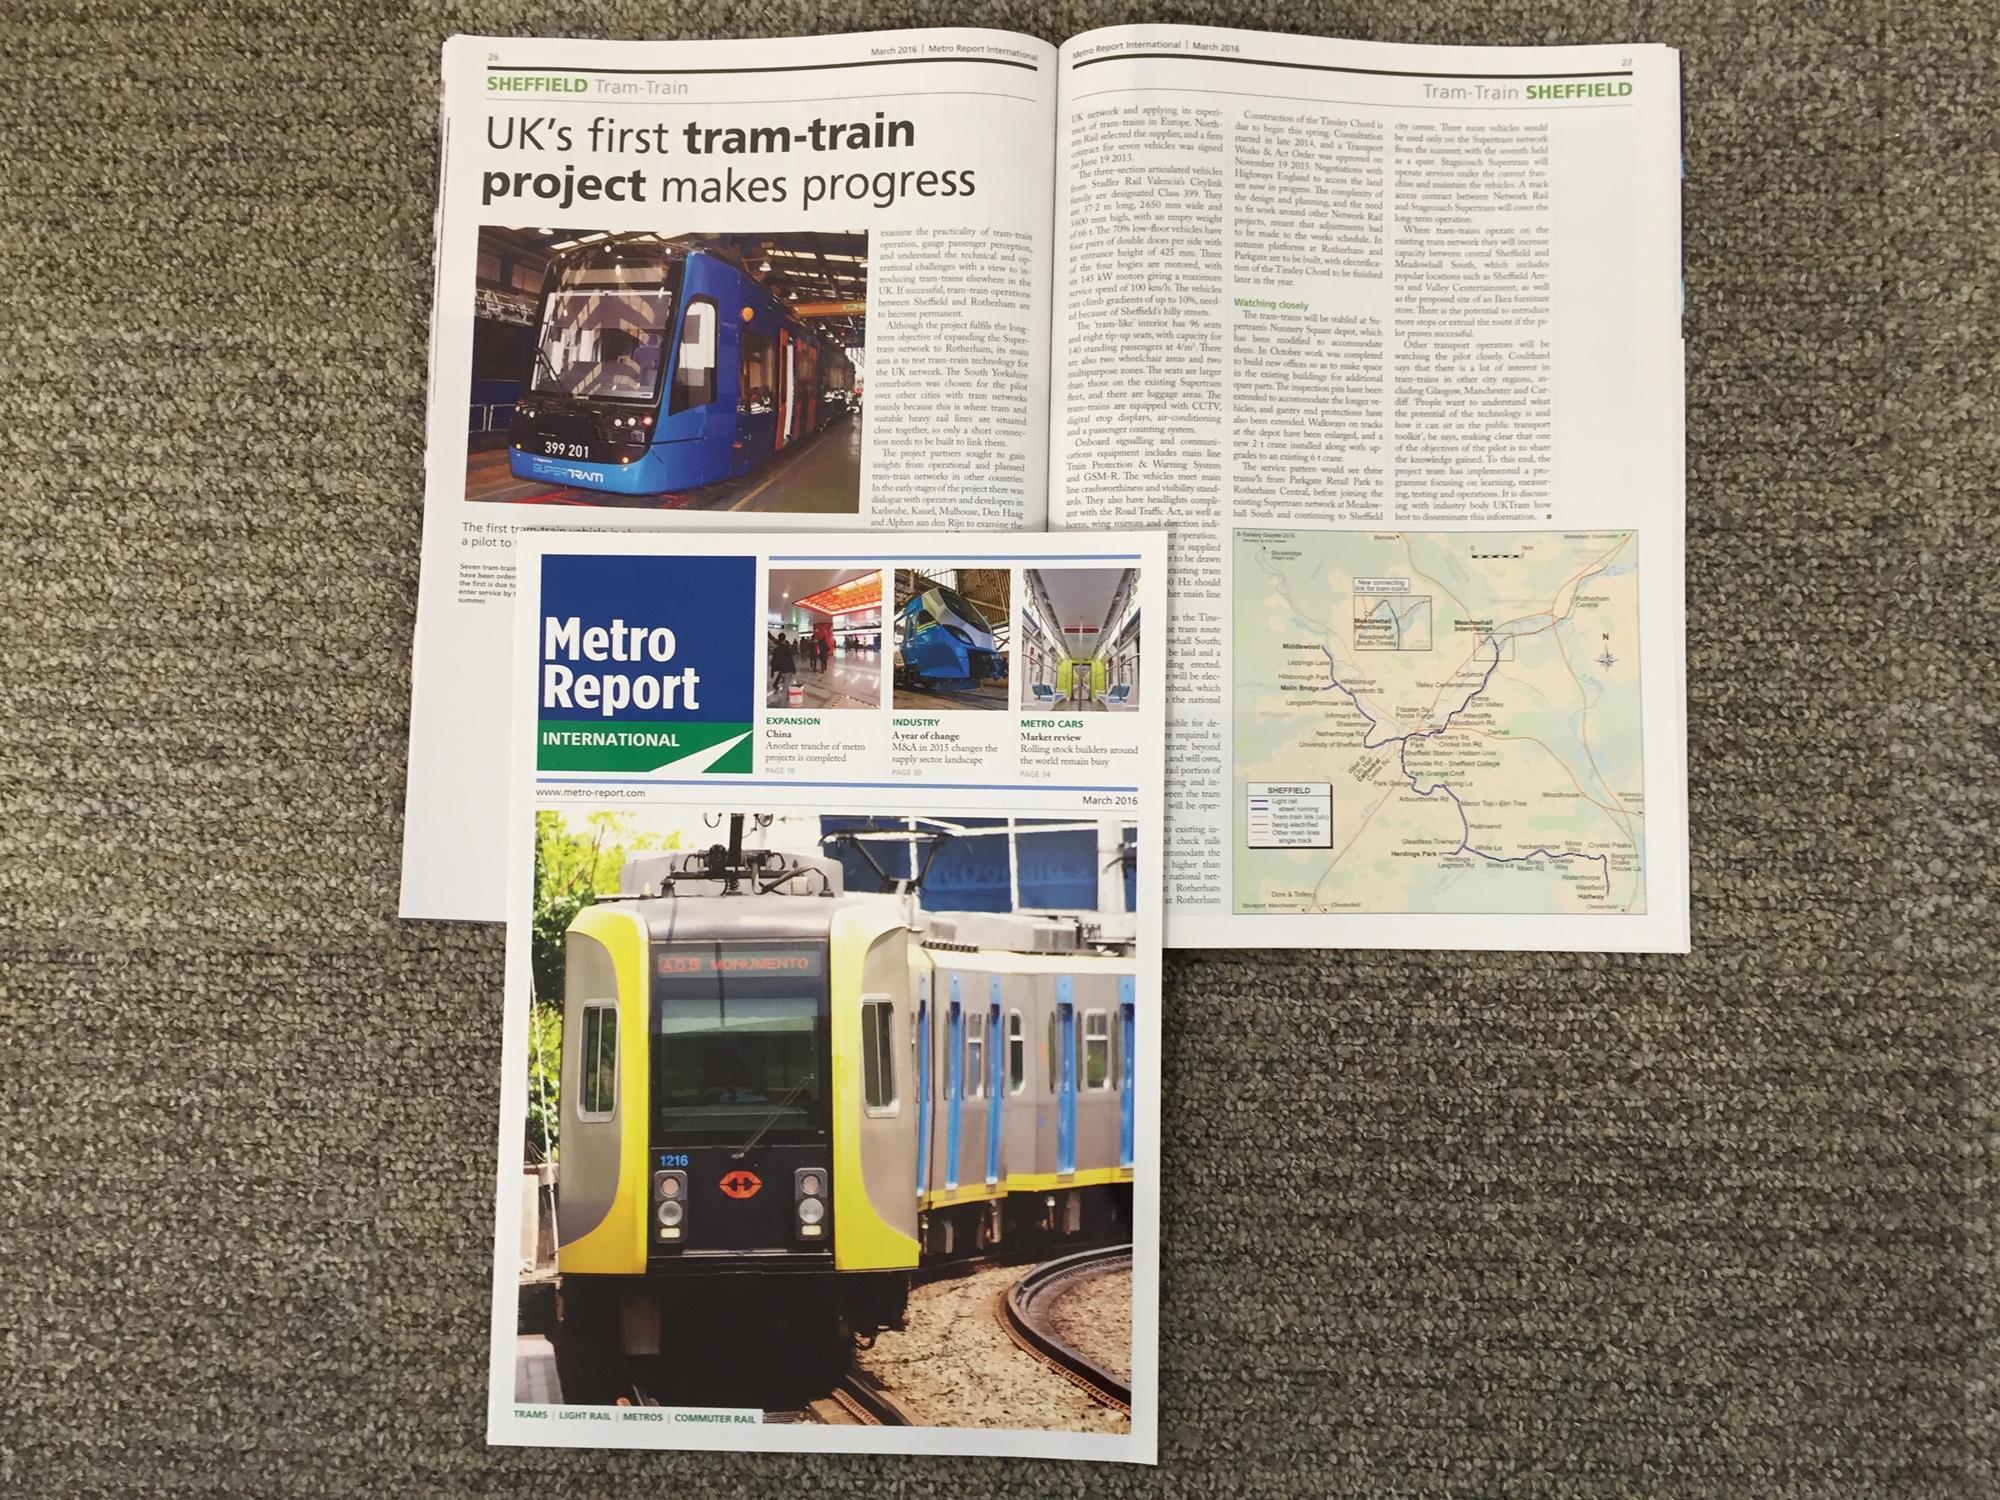 Feature articles in the March 2016 issue of Metro Report International